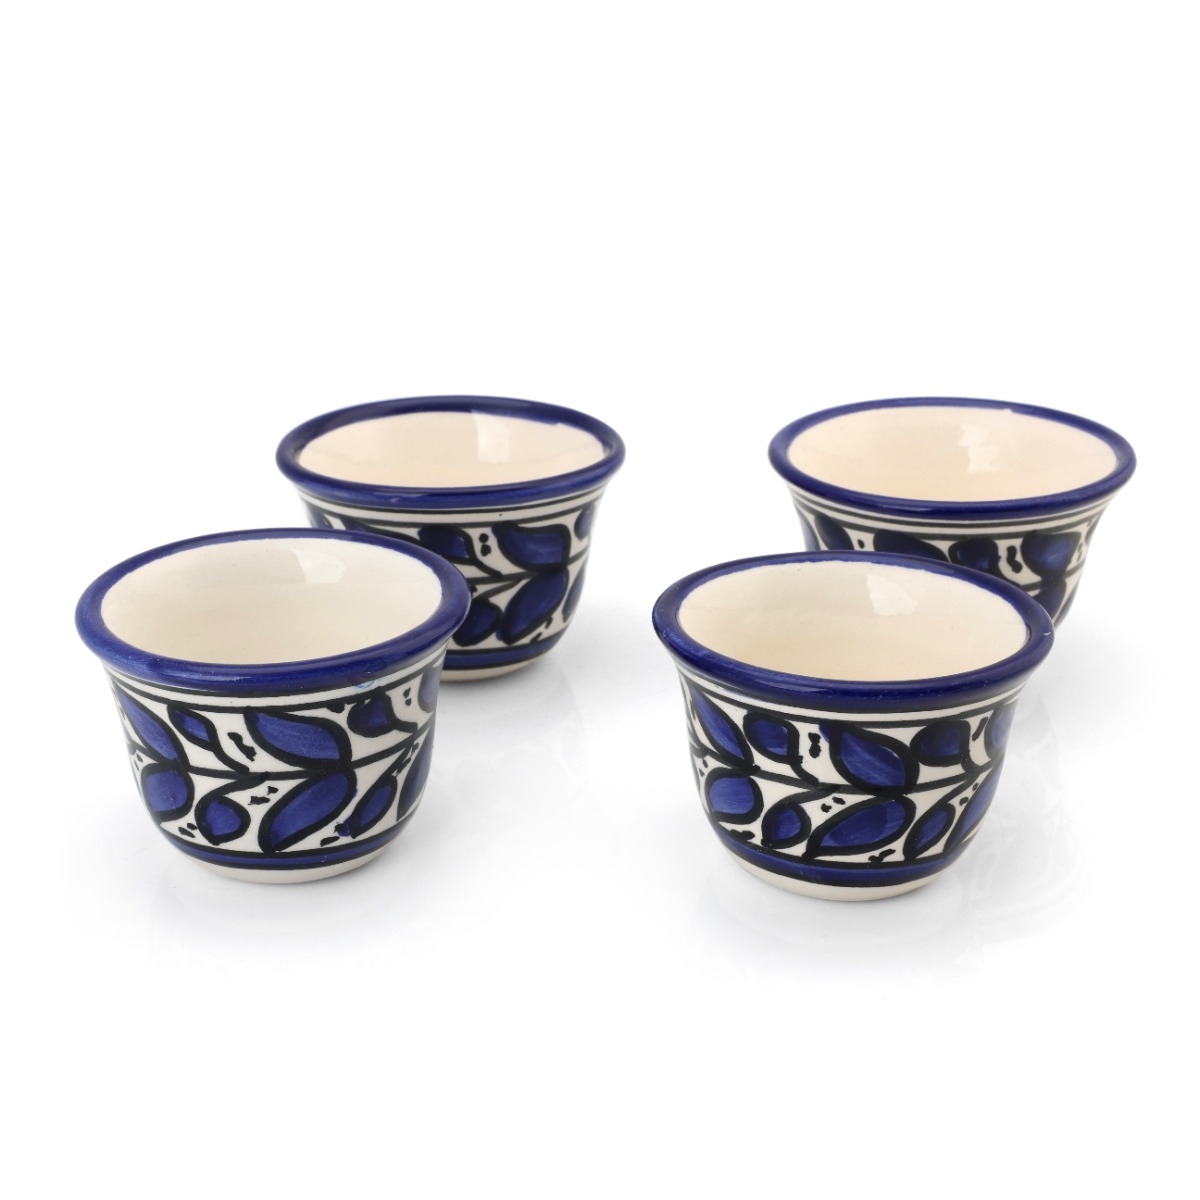 Armenian Ceramics Turkish Coffee Cup Set of 4 - Blue and White - 1